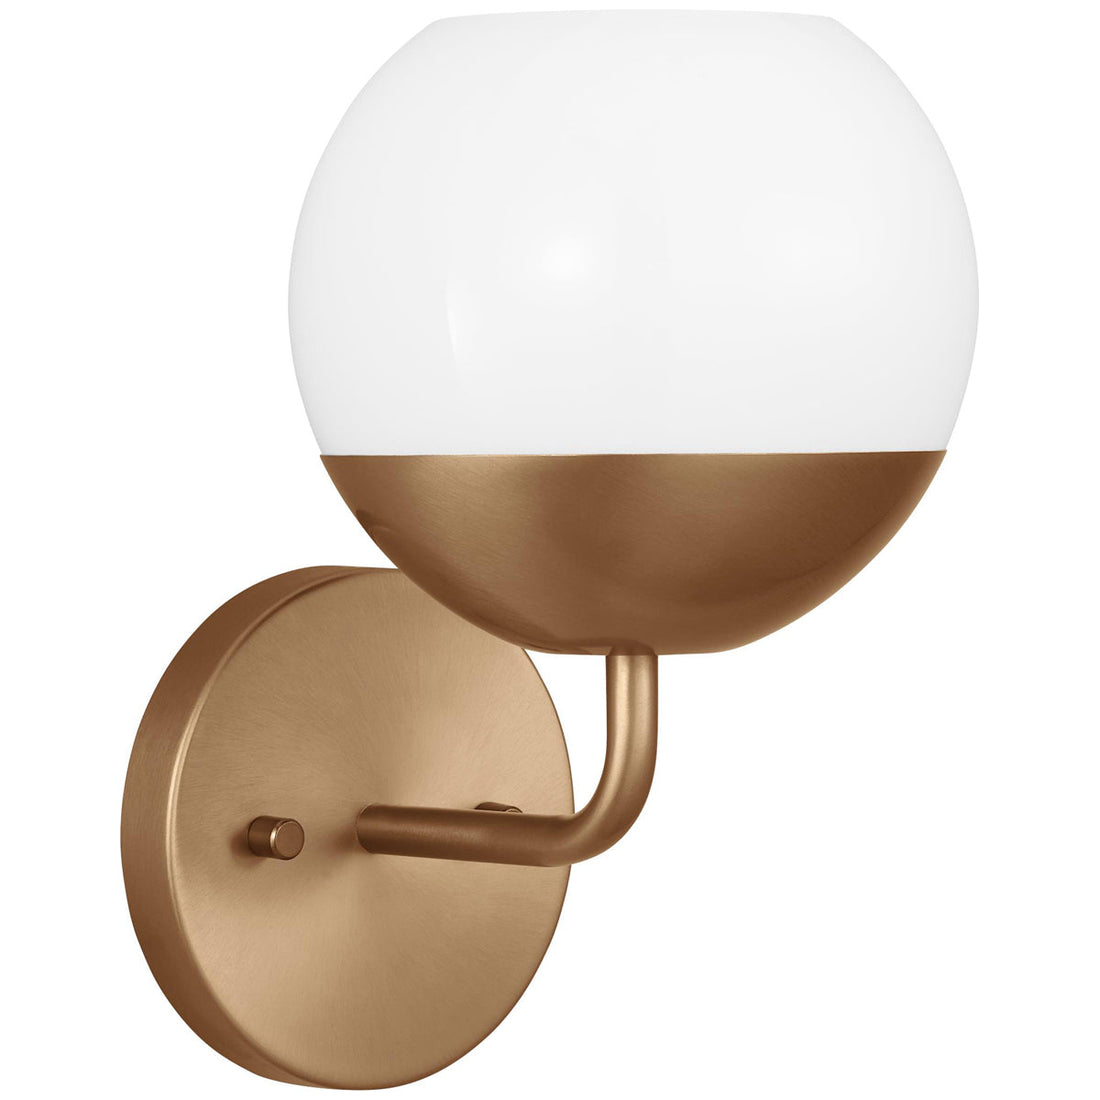 Sea Gull Lighting Alvin 1-Light Wall/Bath Sconce without Bulb